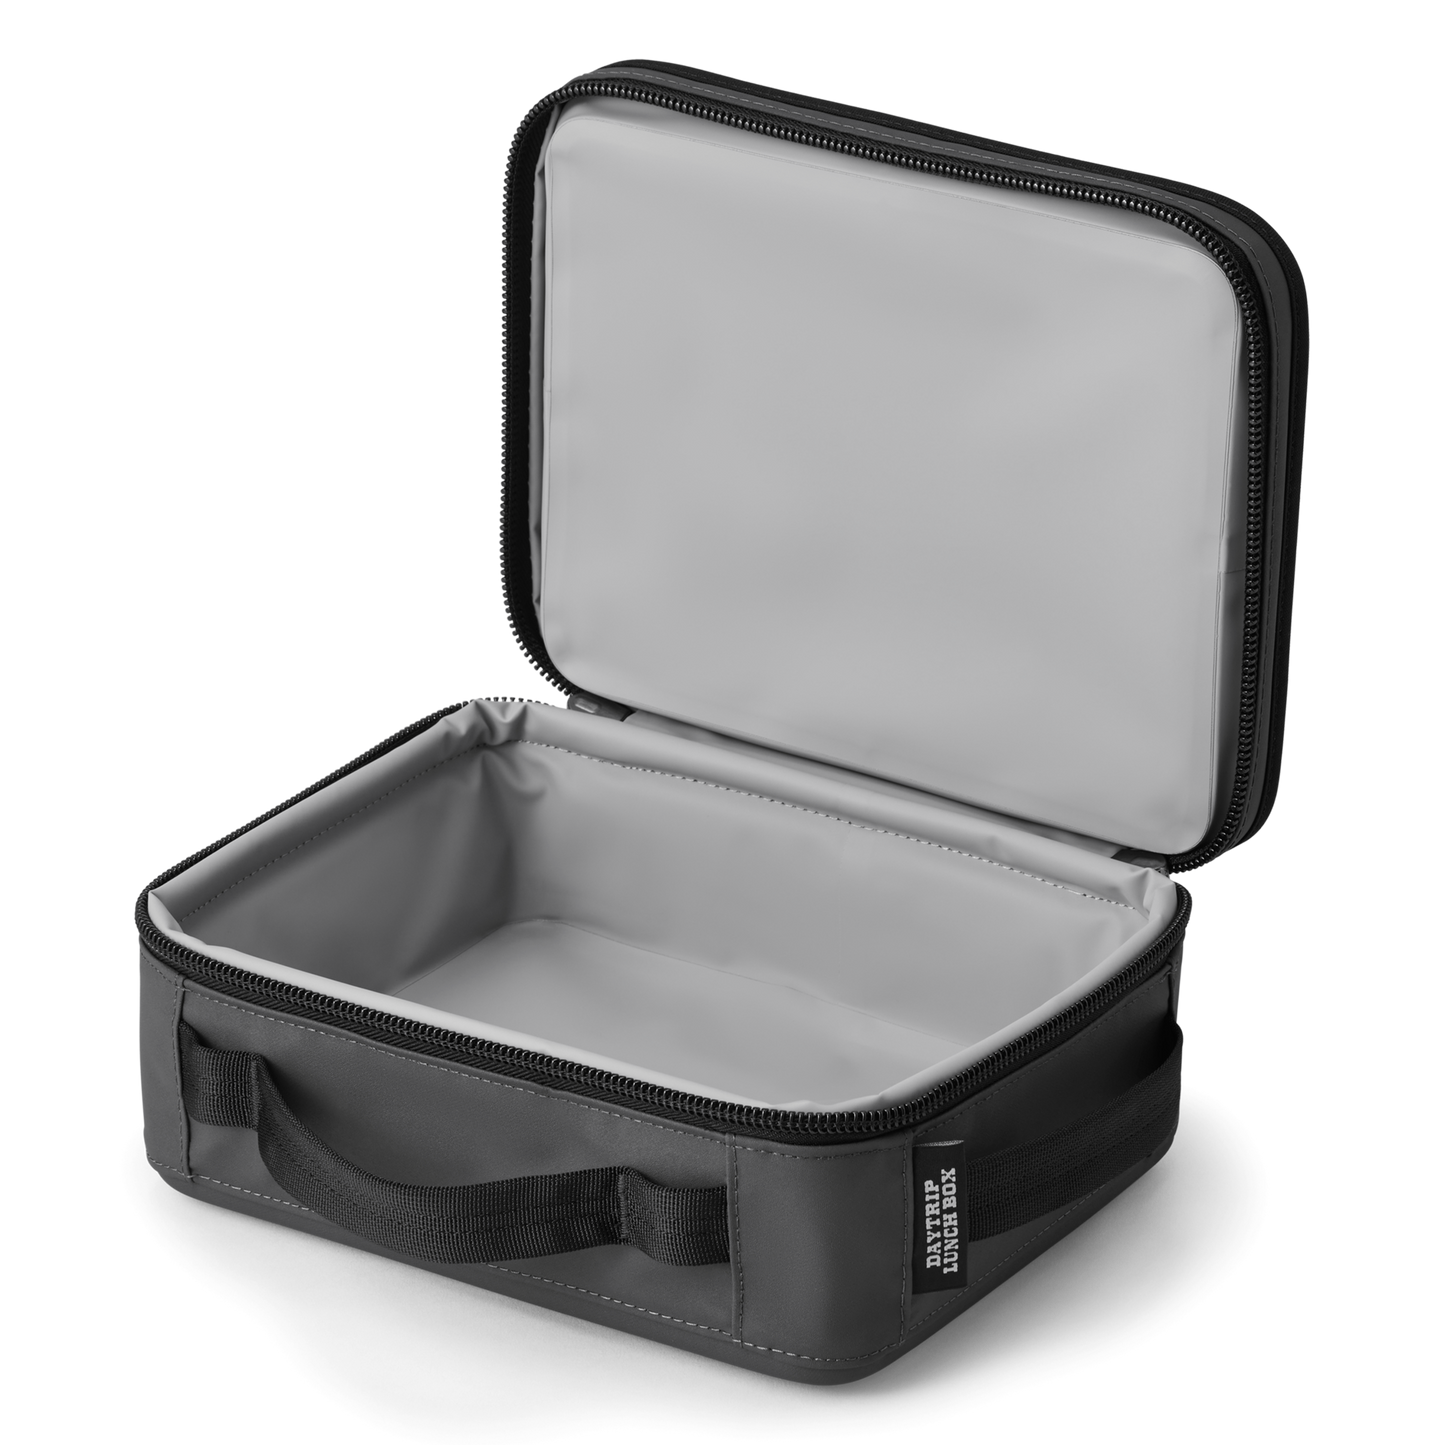 Yeti Daytrip Lunch Box - Charcoal – Pacific Flyway Supplies